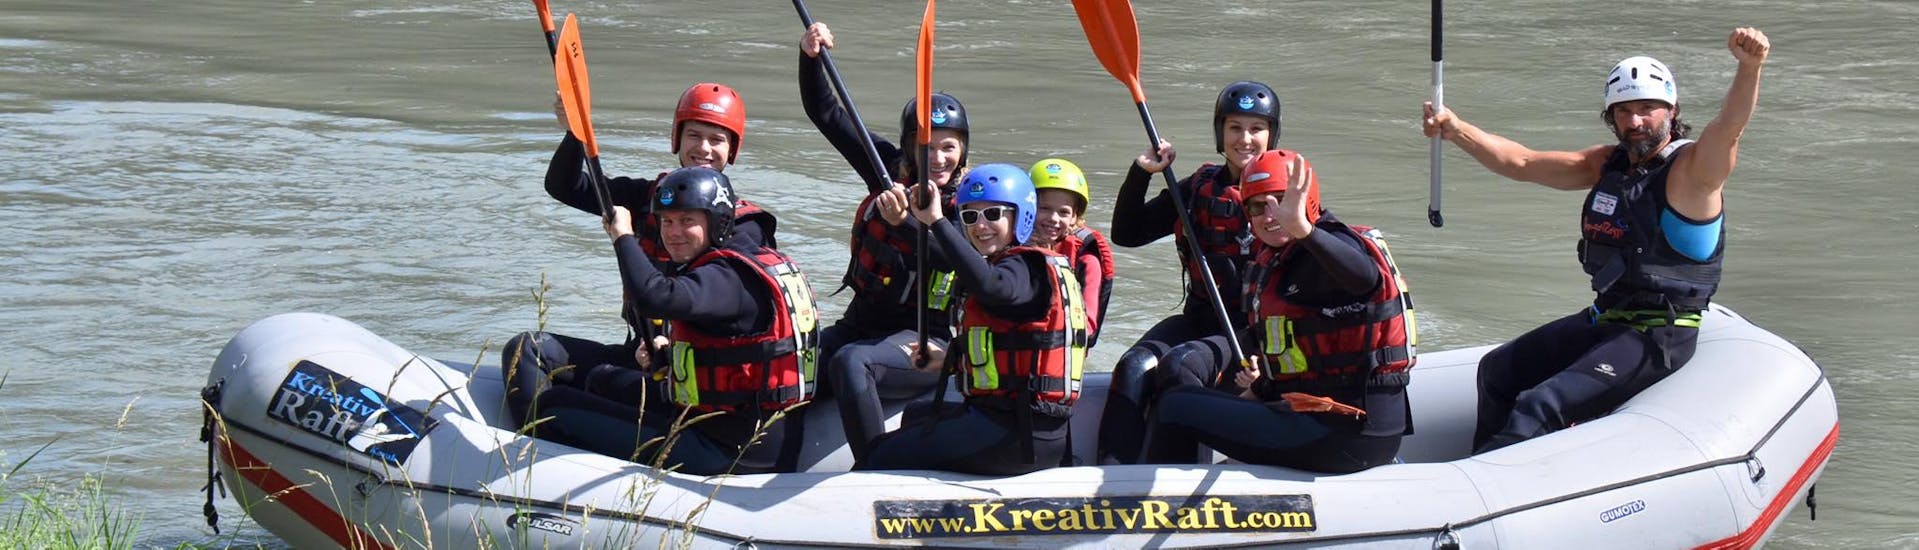 Rafting sul Rienza - Action & Safety.